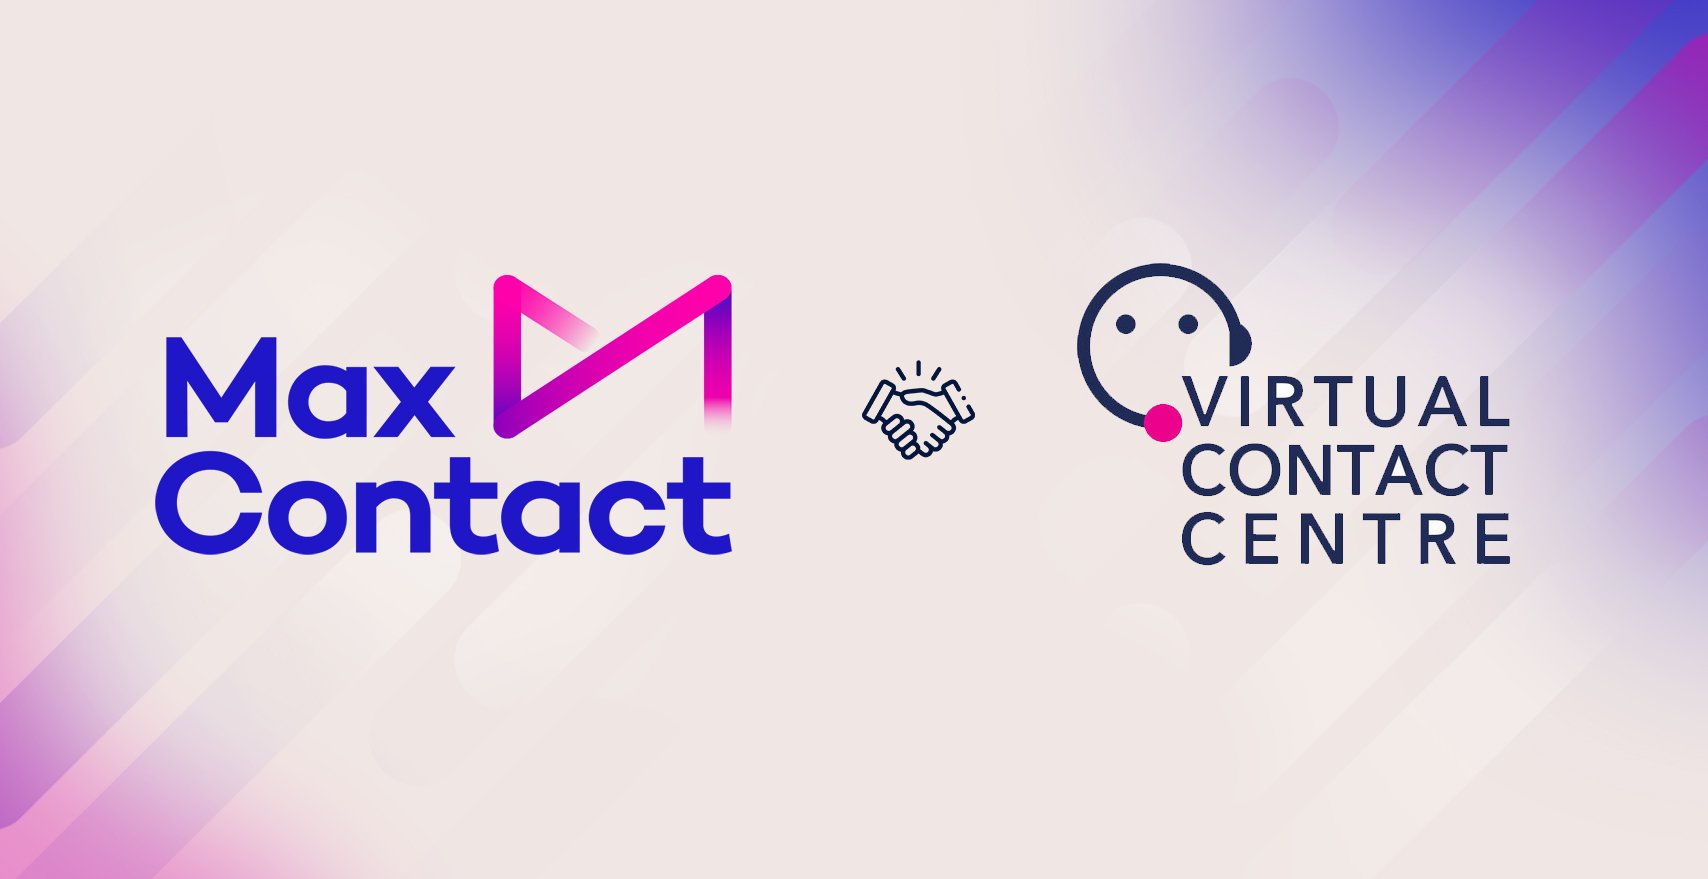 Case Study: MaxContact Supports Virtual Contact Centre's Proof of Concept Trial for Employing Over 50s in Regional Australia